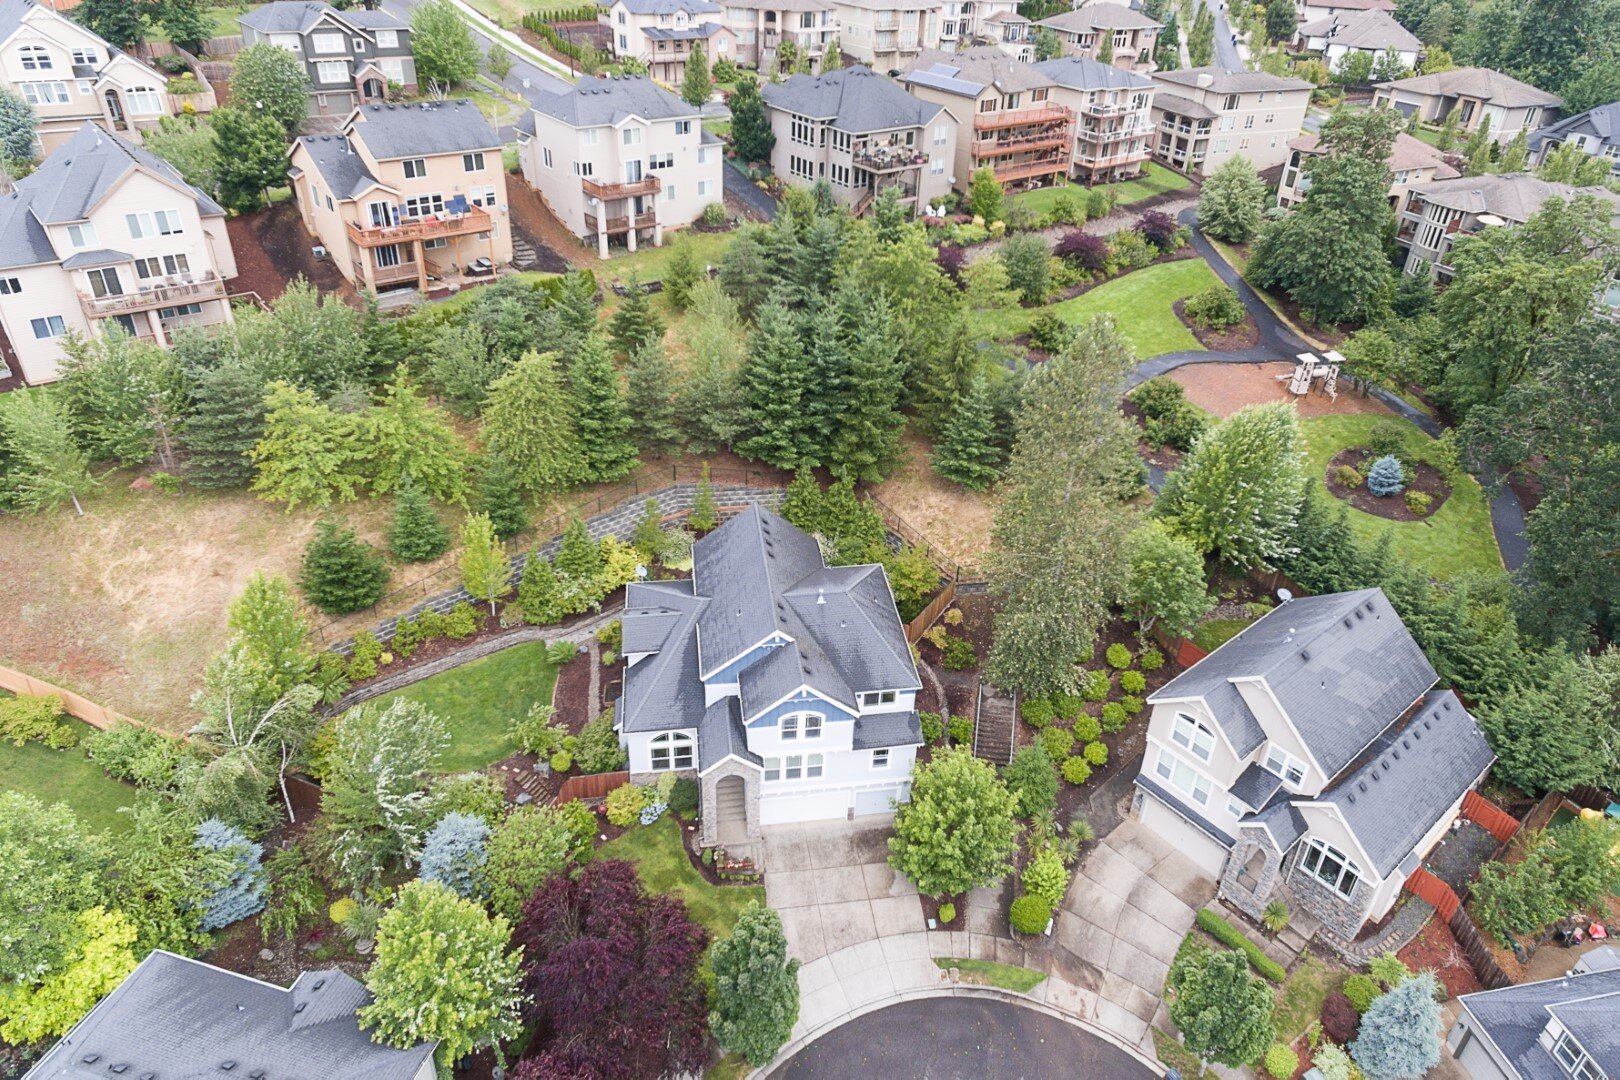 Another great Aerial View showcasing the neighborhood